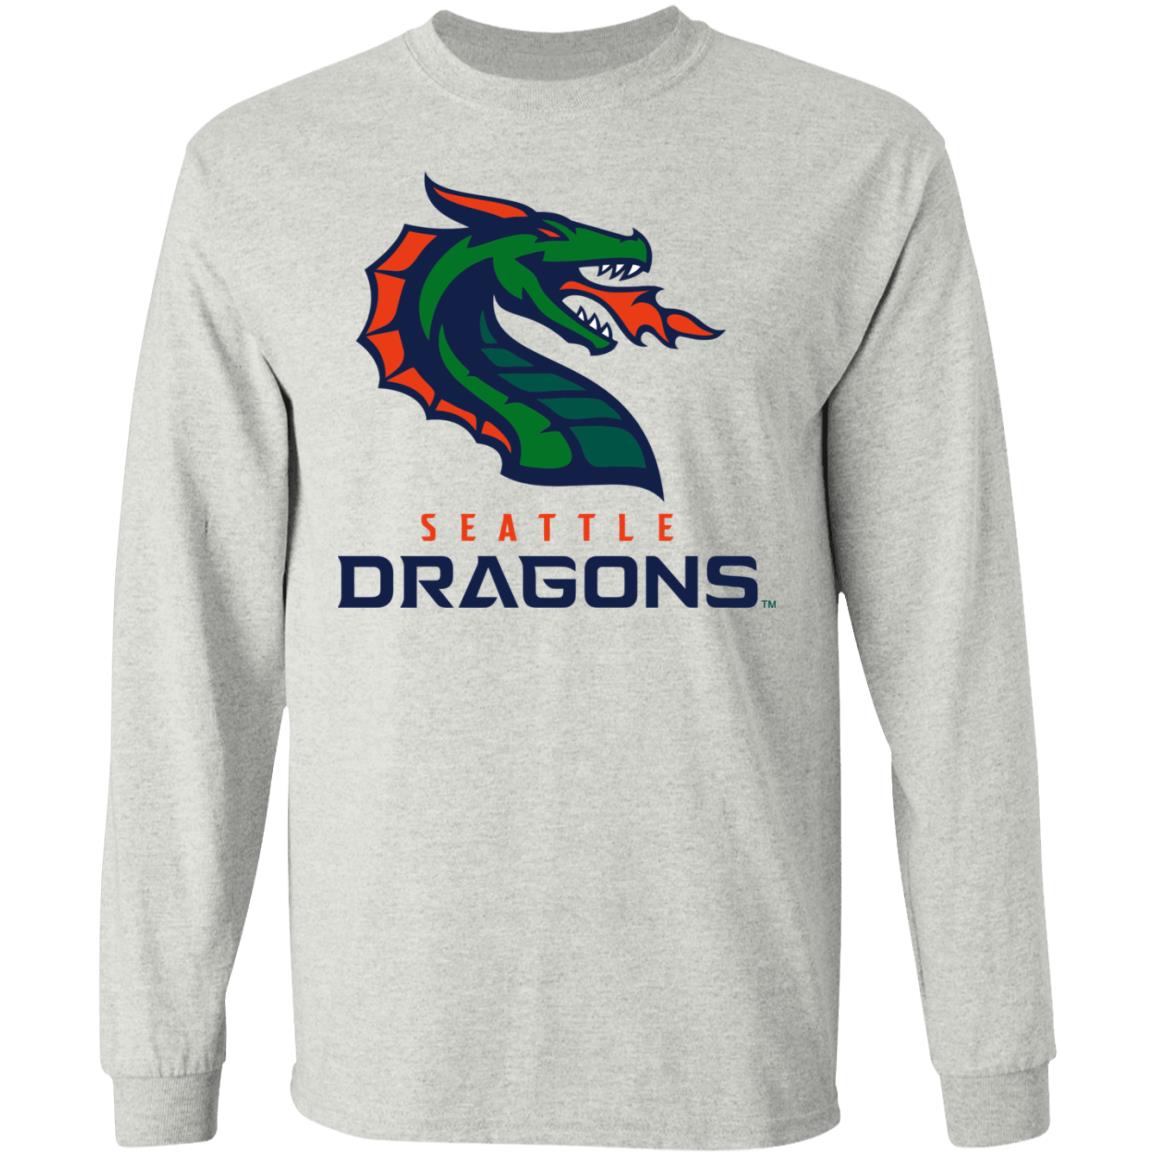 Seattle Dragons! XFL Essential T-Shirt for Sale by eyelikesharx